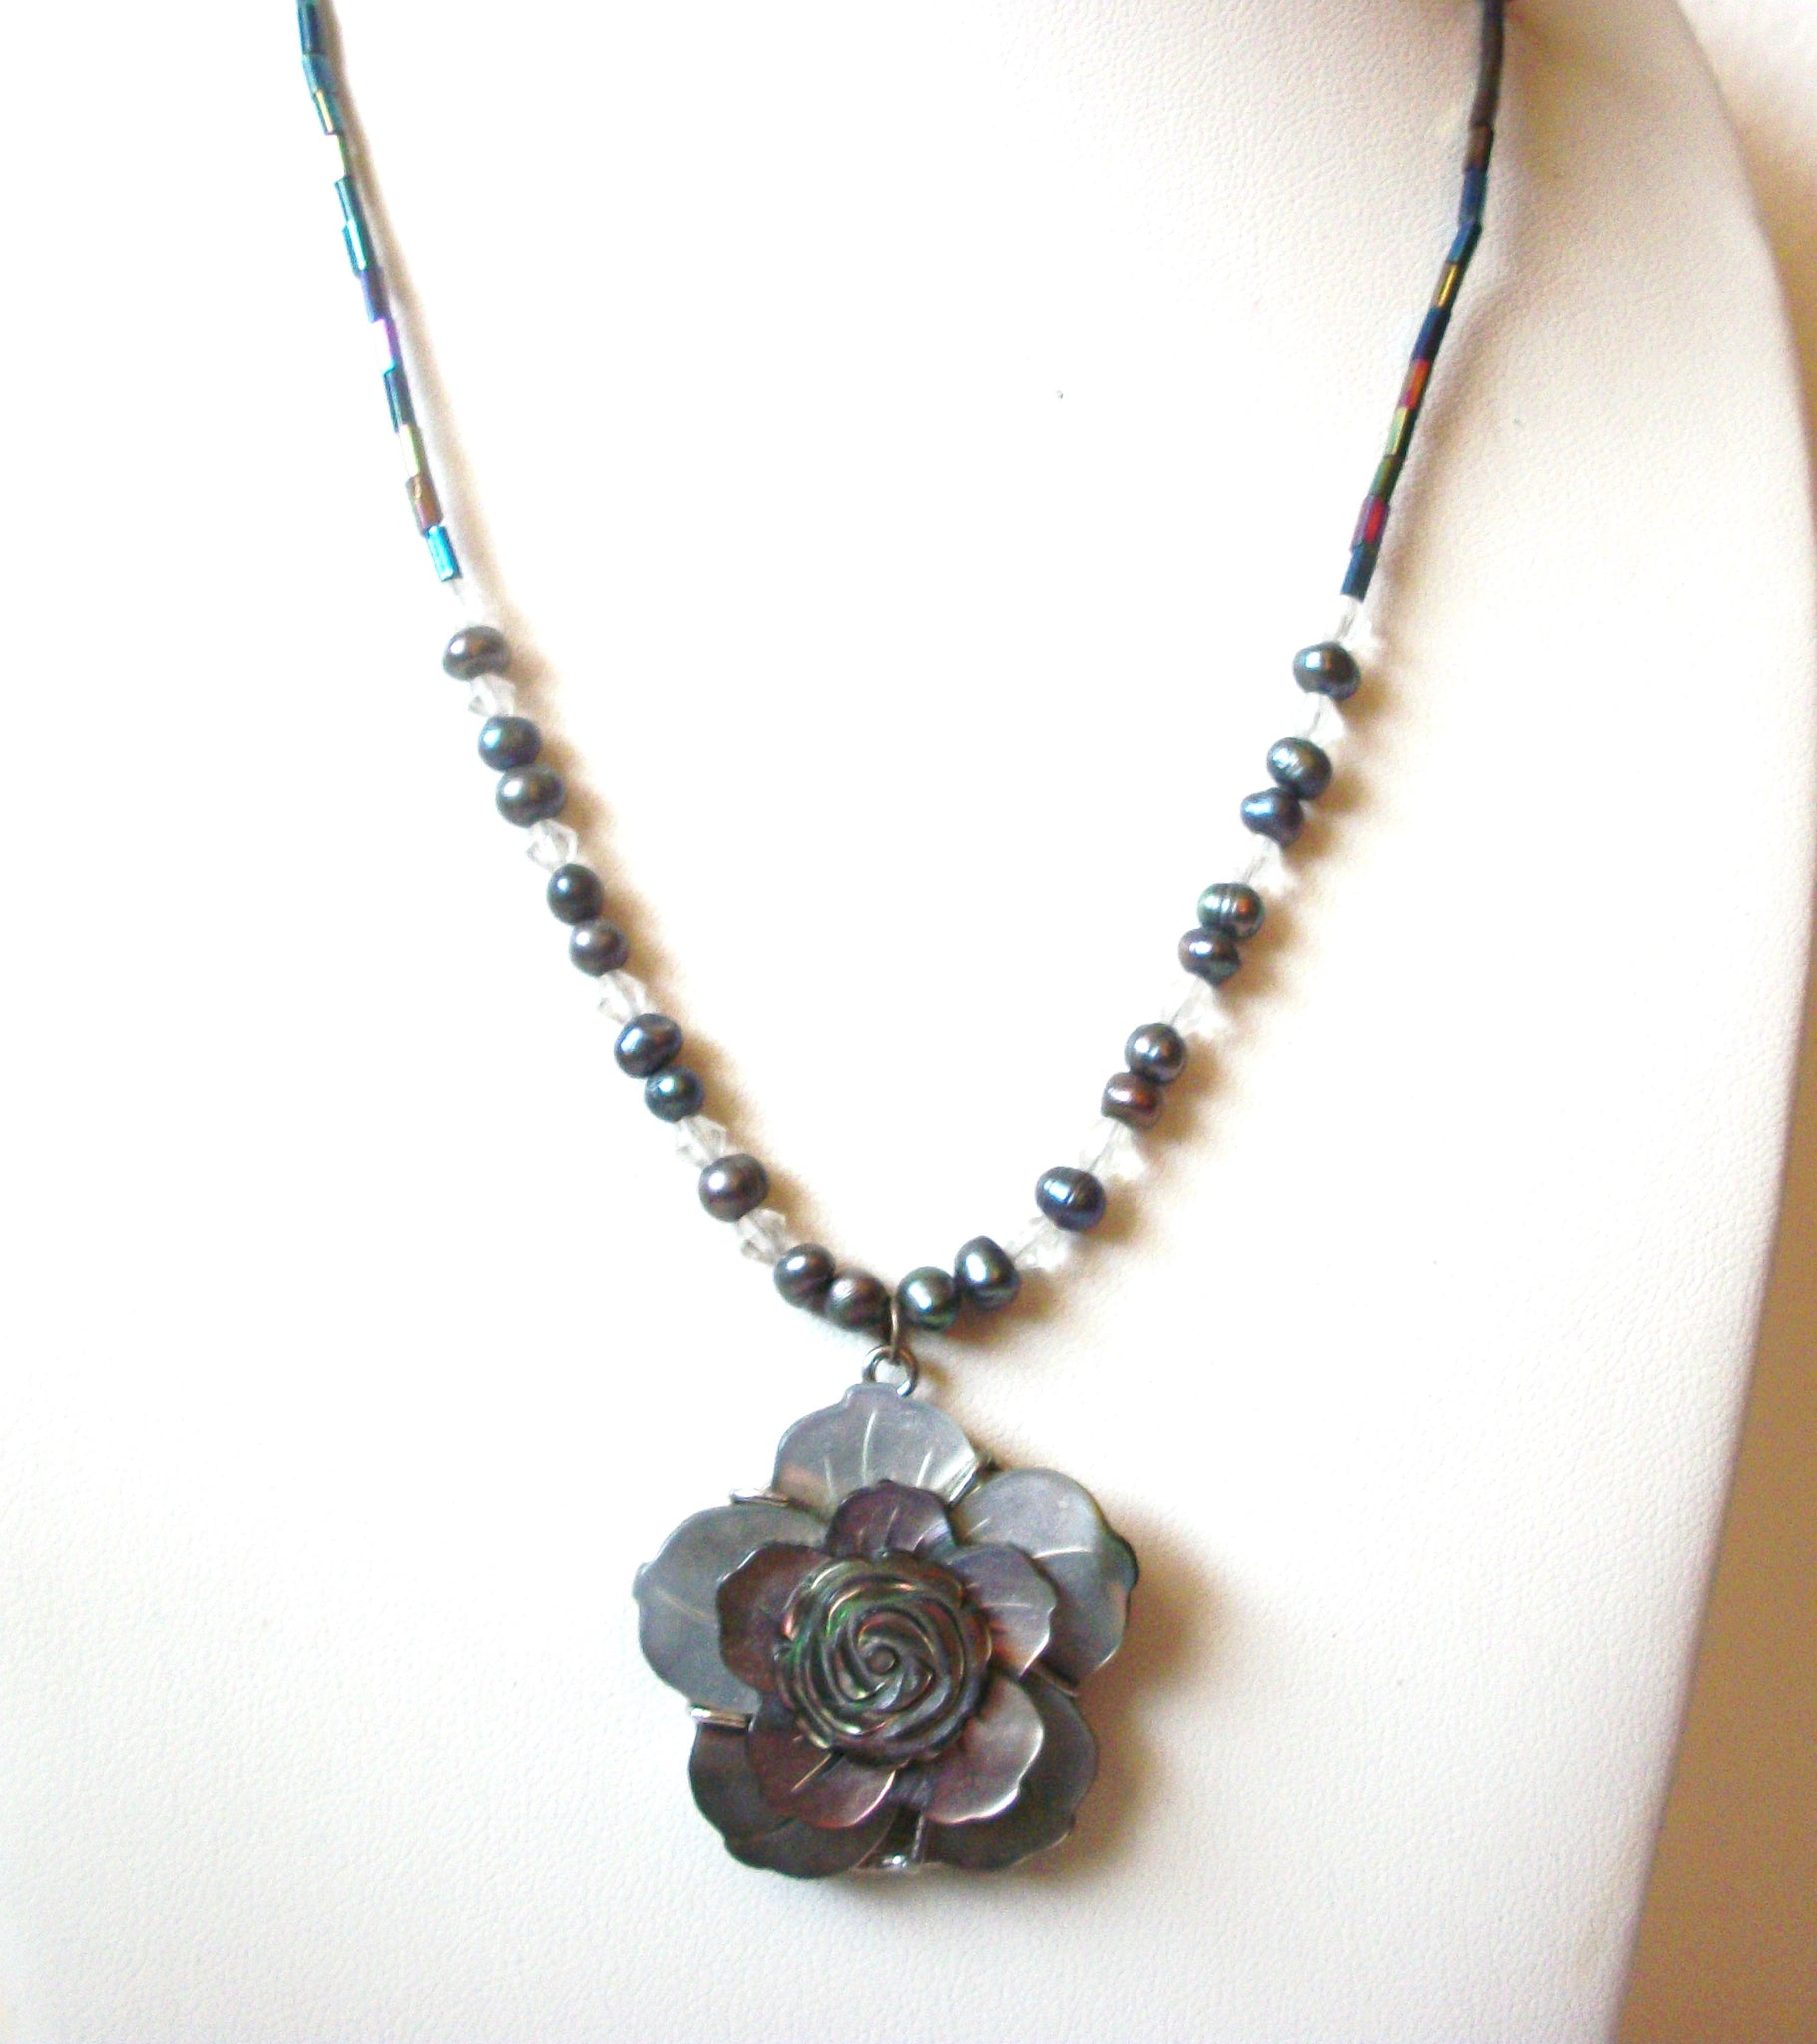 Hand Crafted Paua Abalone Rose Pendant Necklace 121120